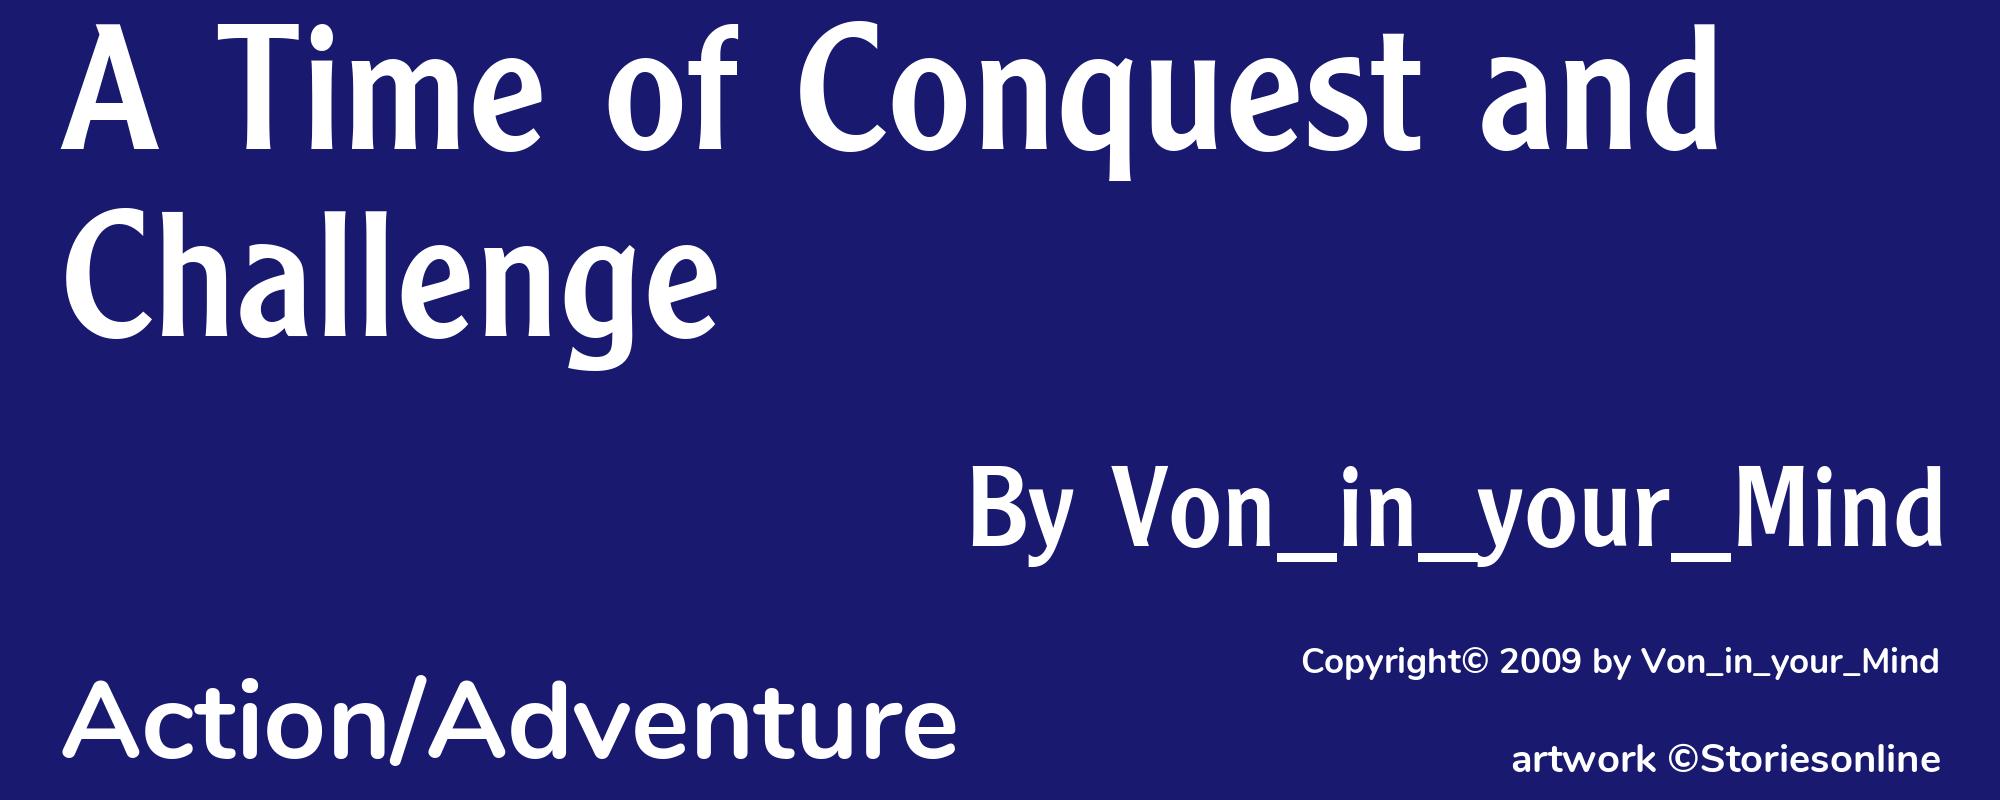 A Time of Conquest and Challenge - Cover